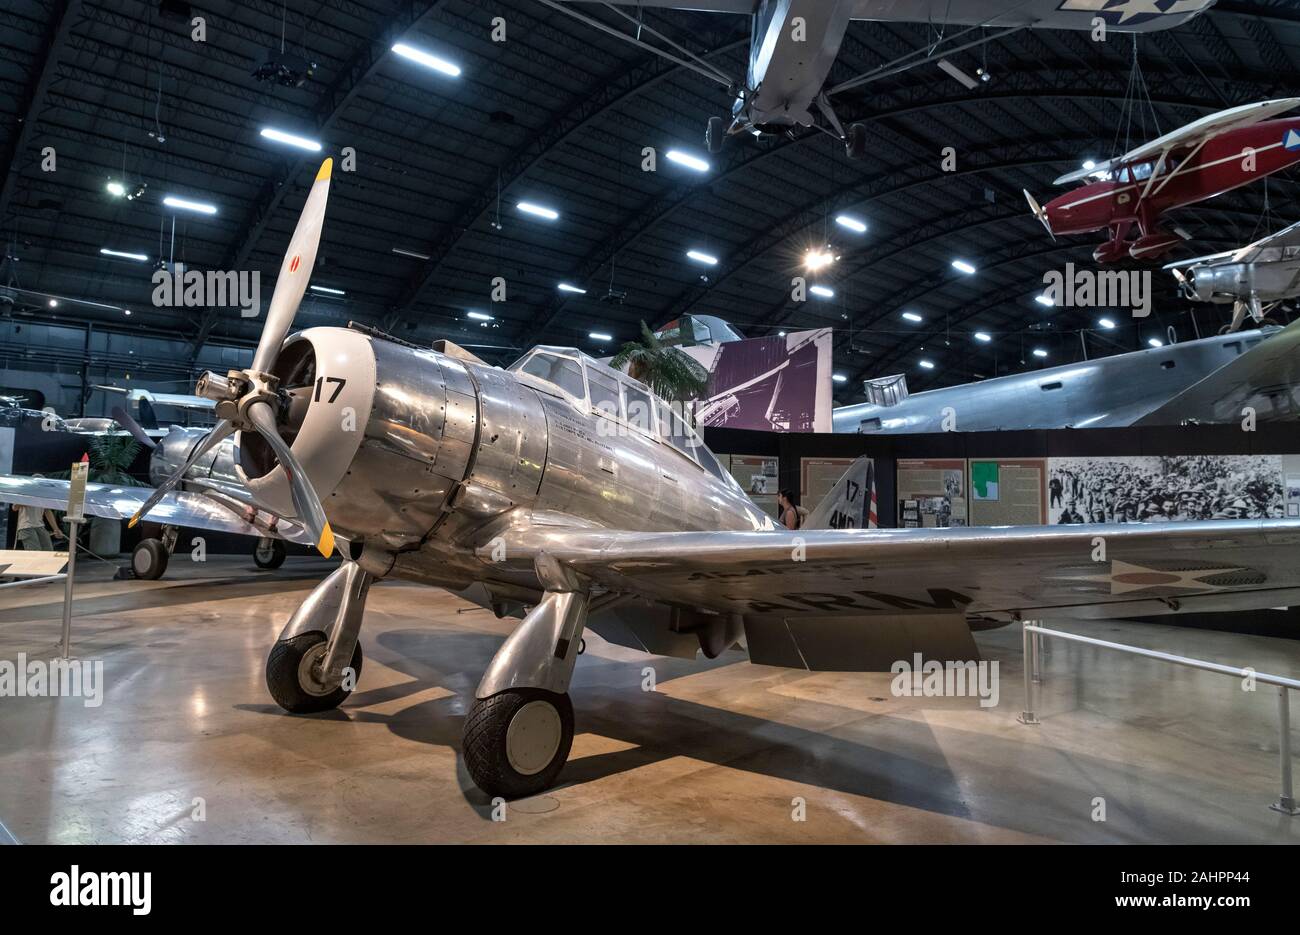 Seversky P-35 WWII fighter aircraft at the National Museum of the United States Air Force (formerly the United States Air Force Museum), Dayton, Ohio, USA Stock Photo